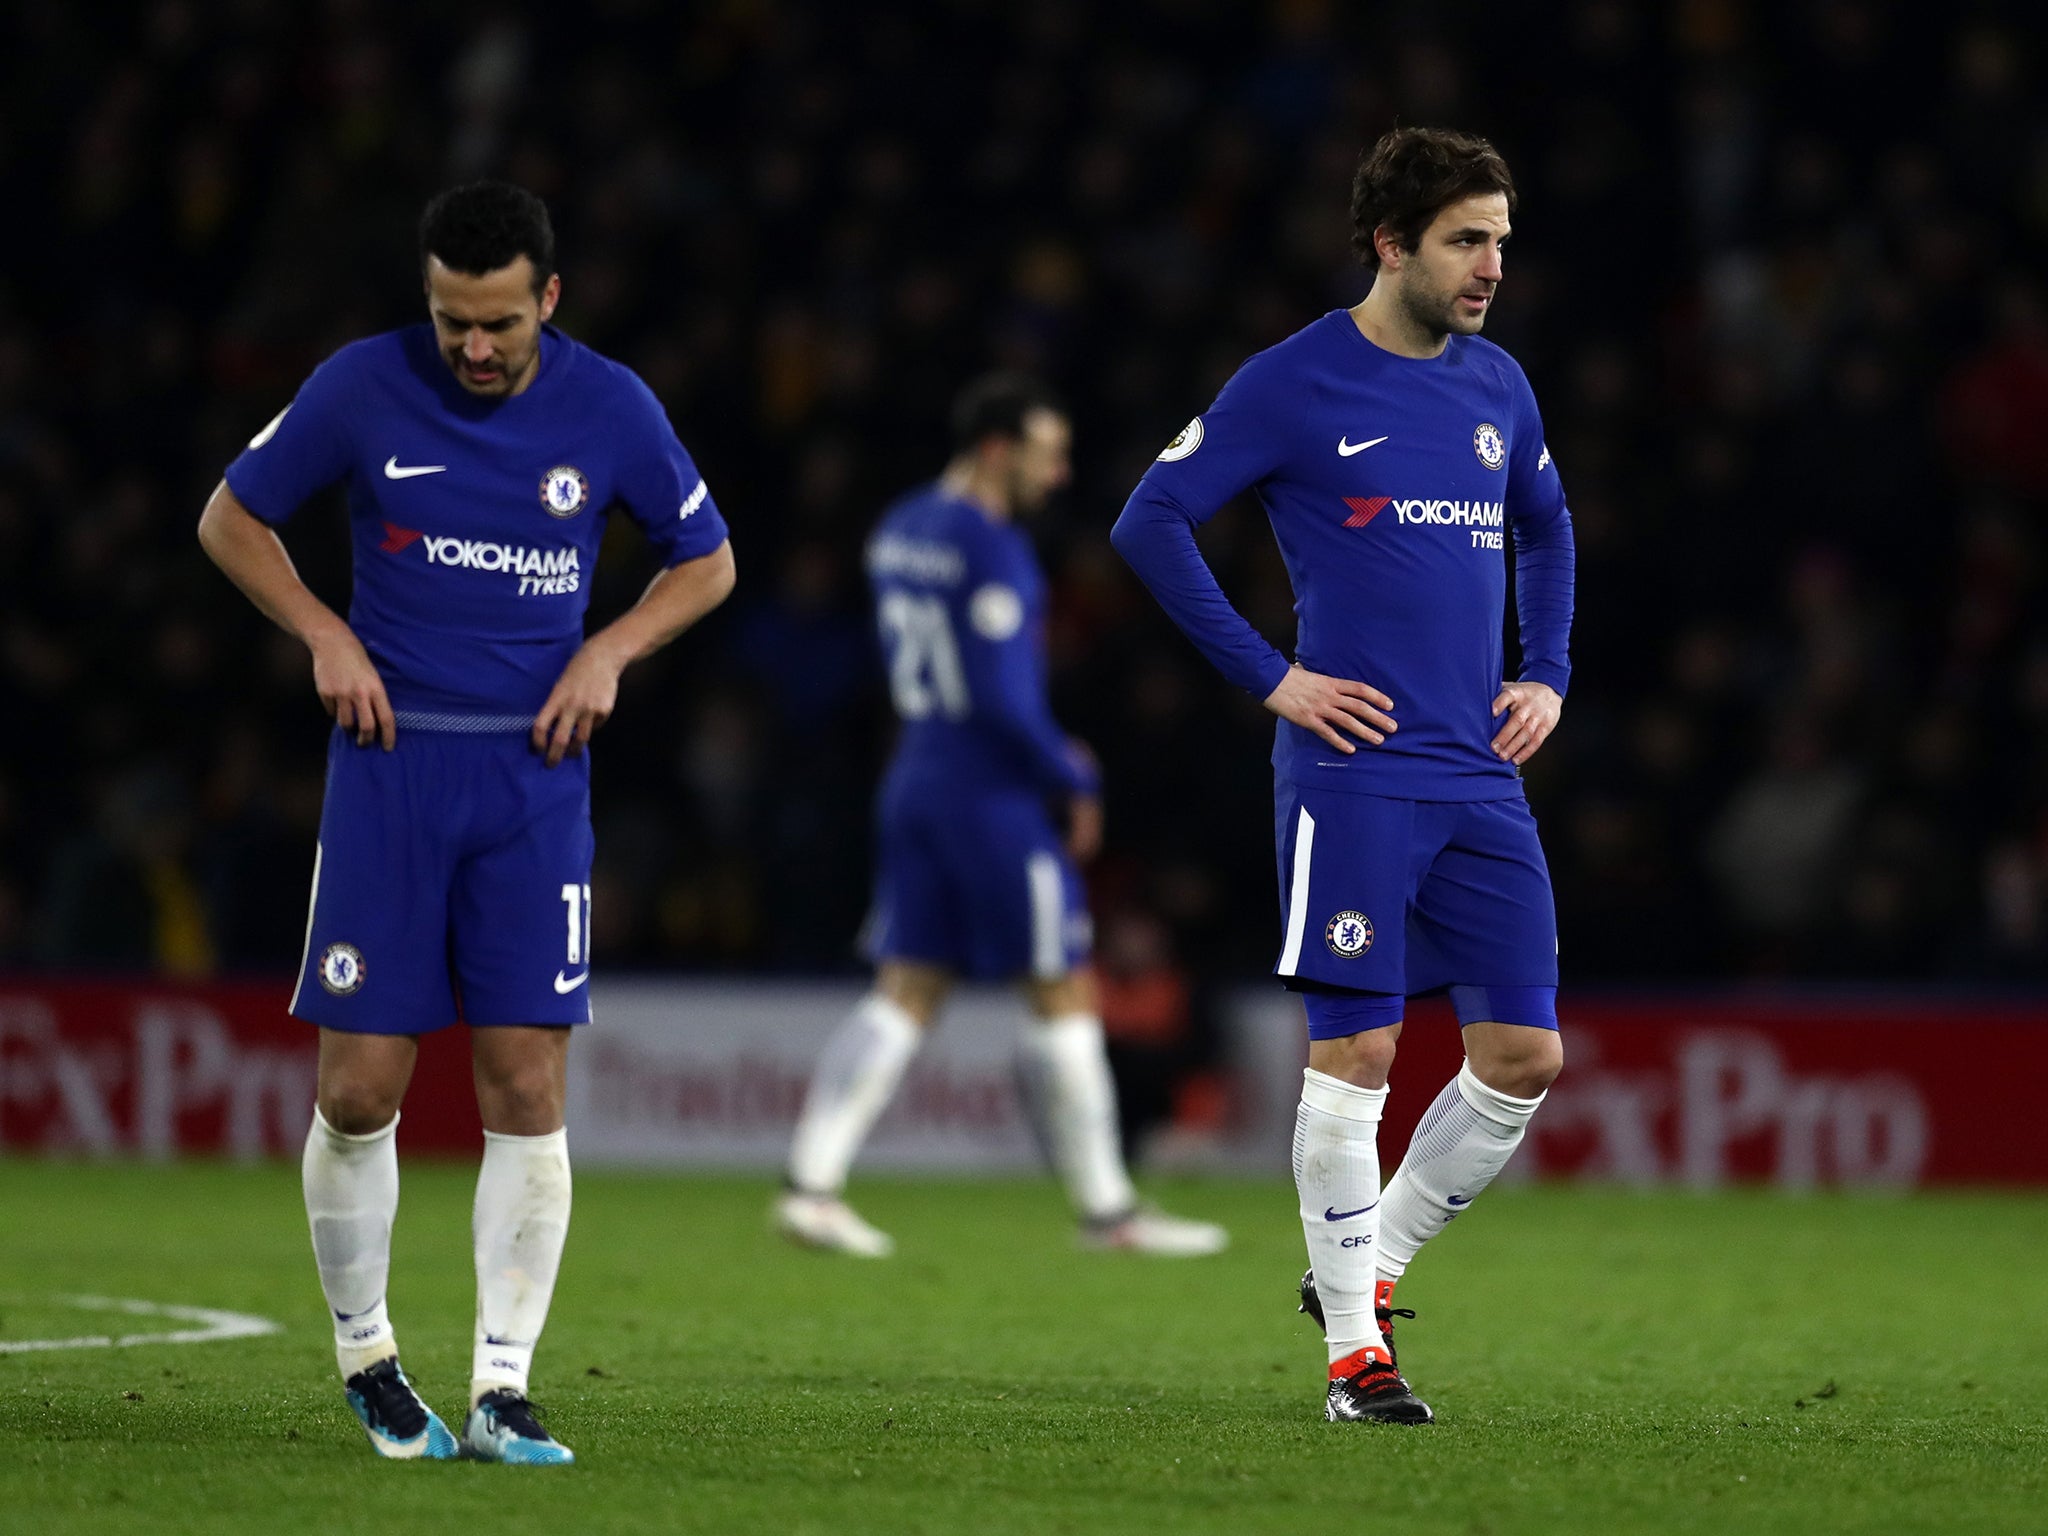 Pedro and Cesc Fabregas react to Chelsea's 4-1 defeat by Watford